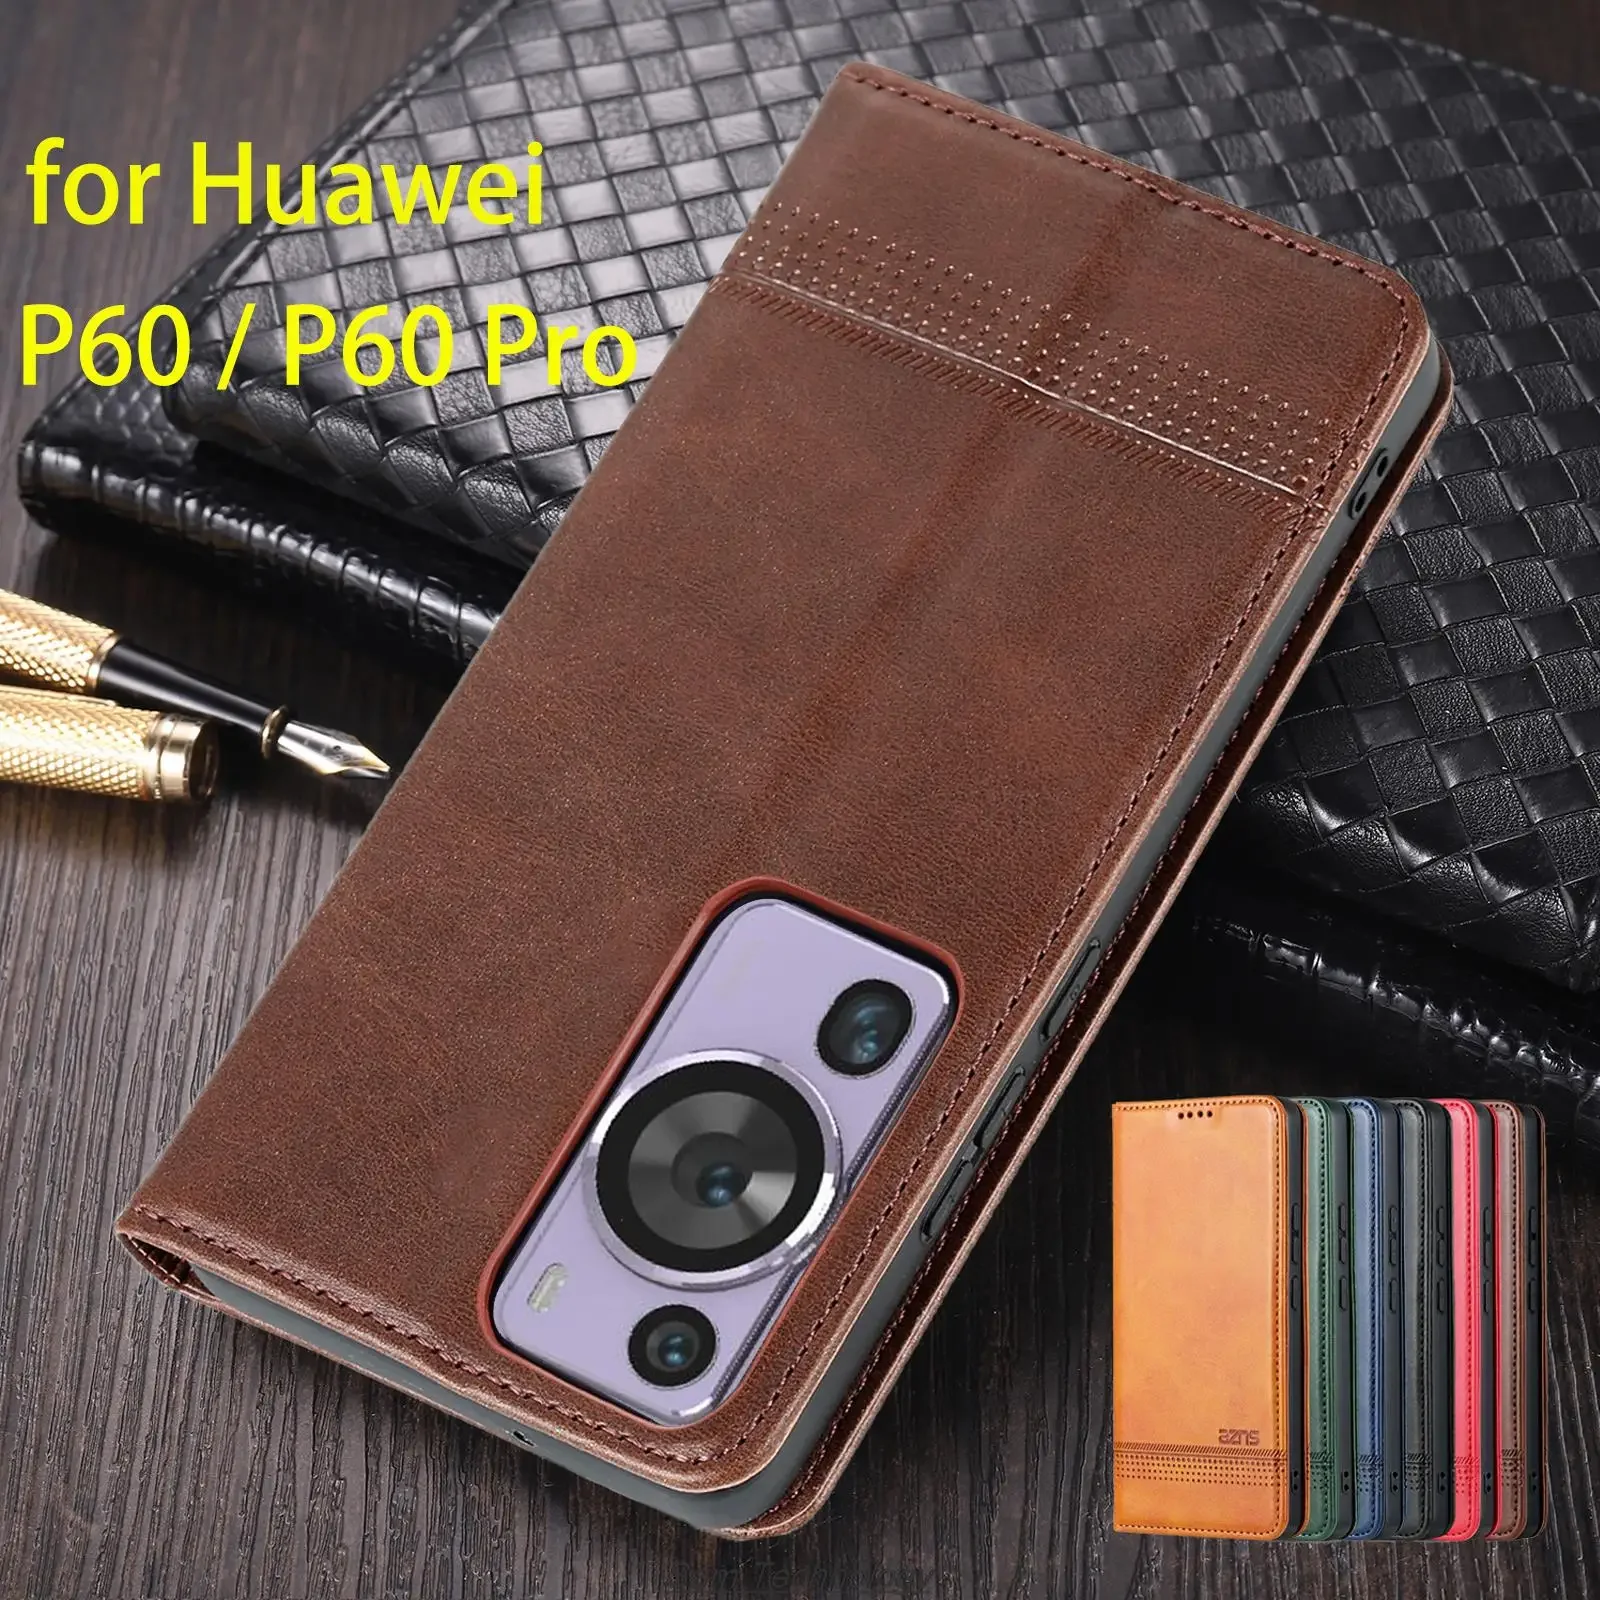 

Deluxe Magnetic Adsorption Leather Fitted Case for Huawei P60 / Huawei P60 Pro Flip Cover Protective Case Capa Fundas Coque